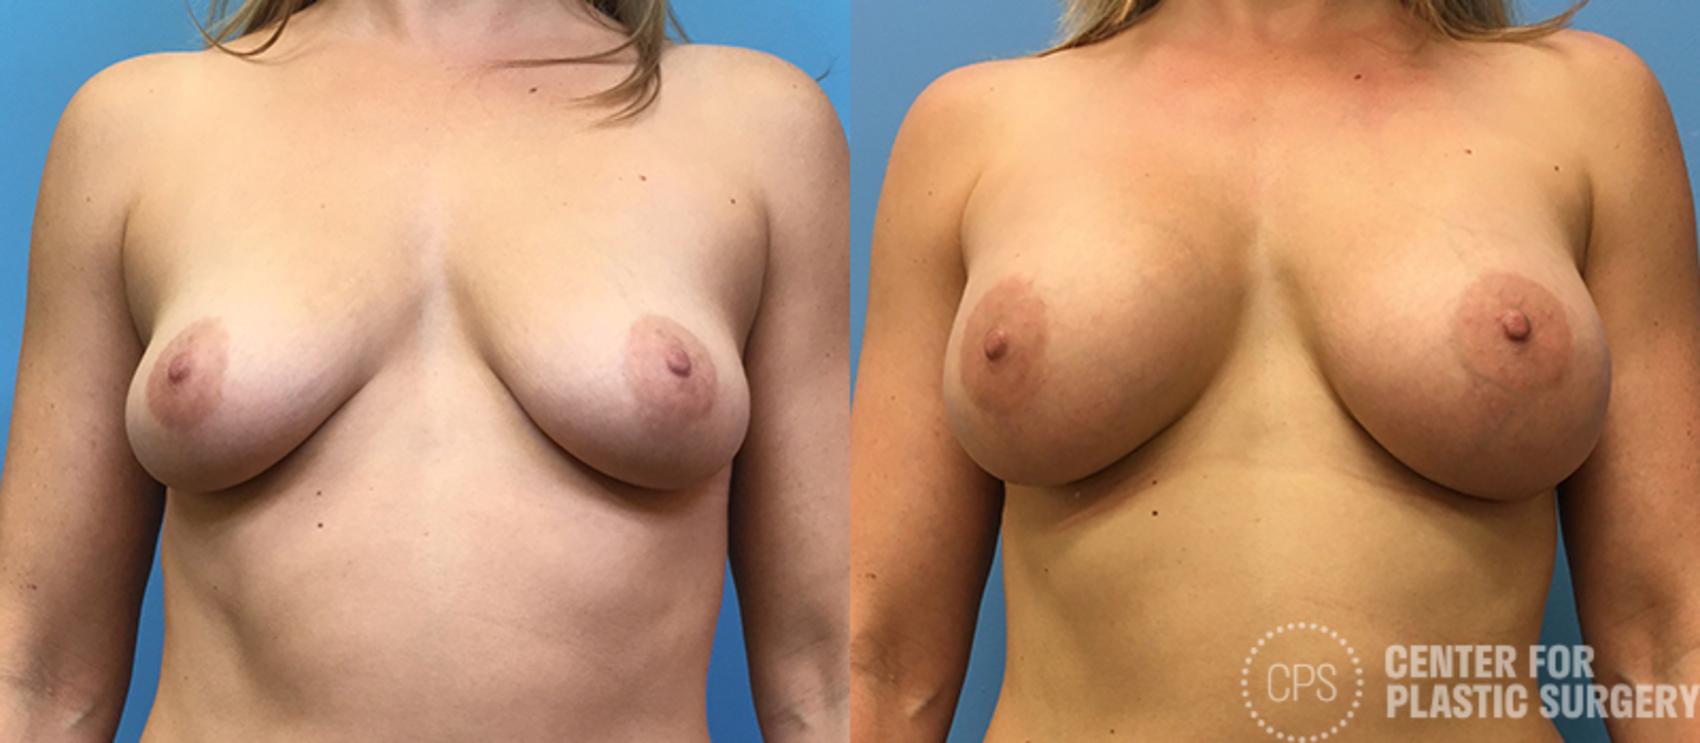 Breast Augmentation with Lift Case 98 Before & After Front | Chevy Chase & Annandale, Washington D.C. Metropolitan Area | Center for Plastic Surgery